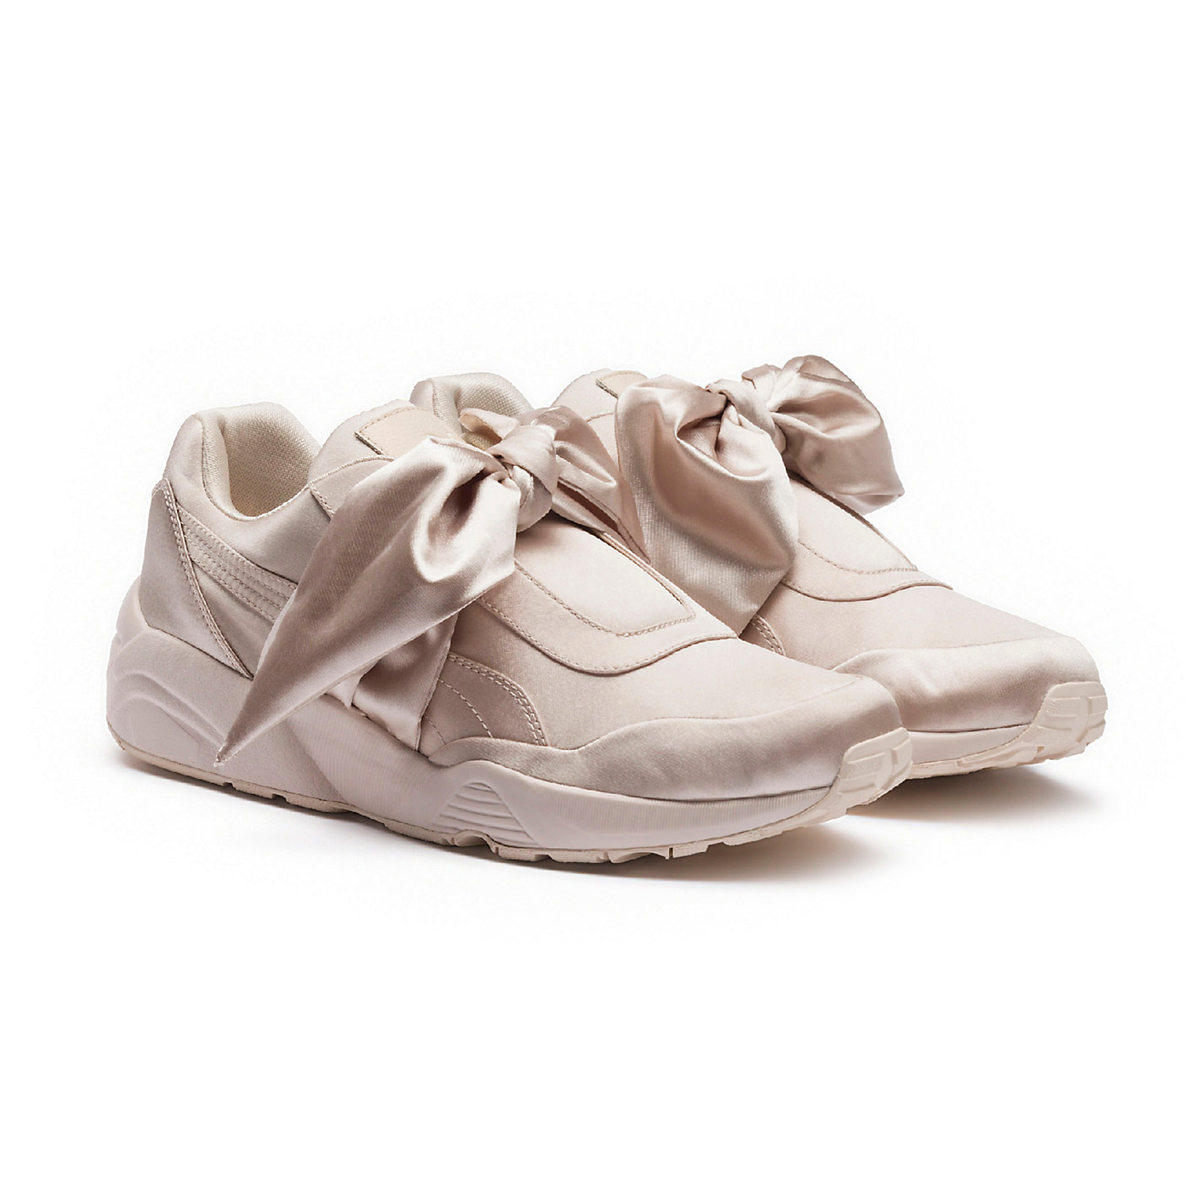 puma sneaker with bow